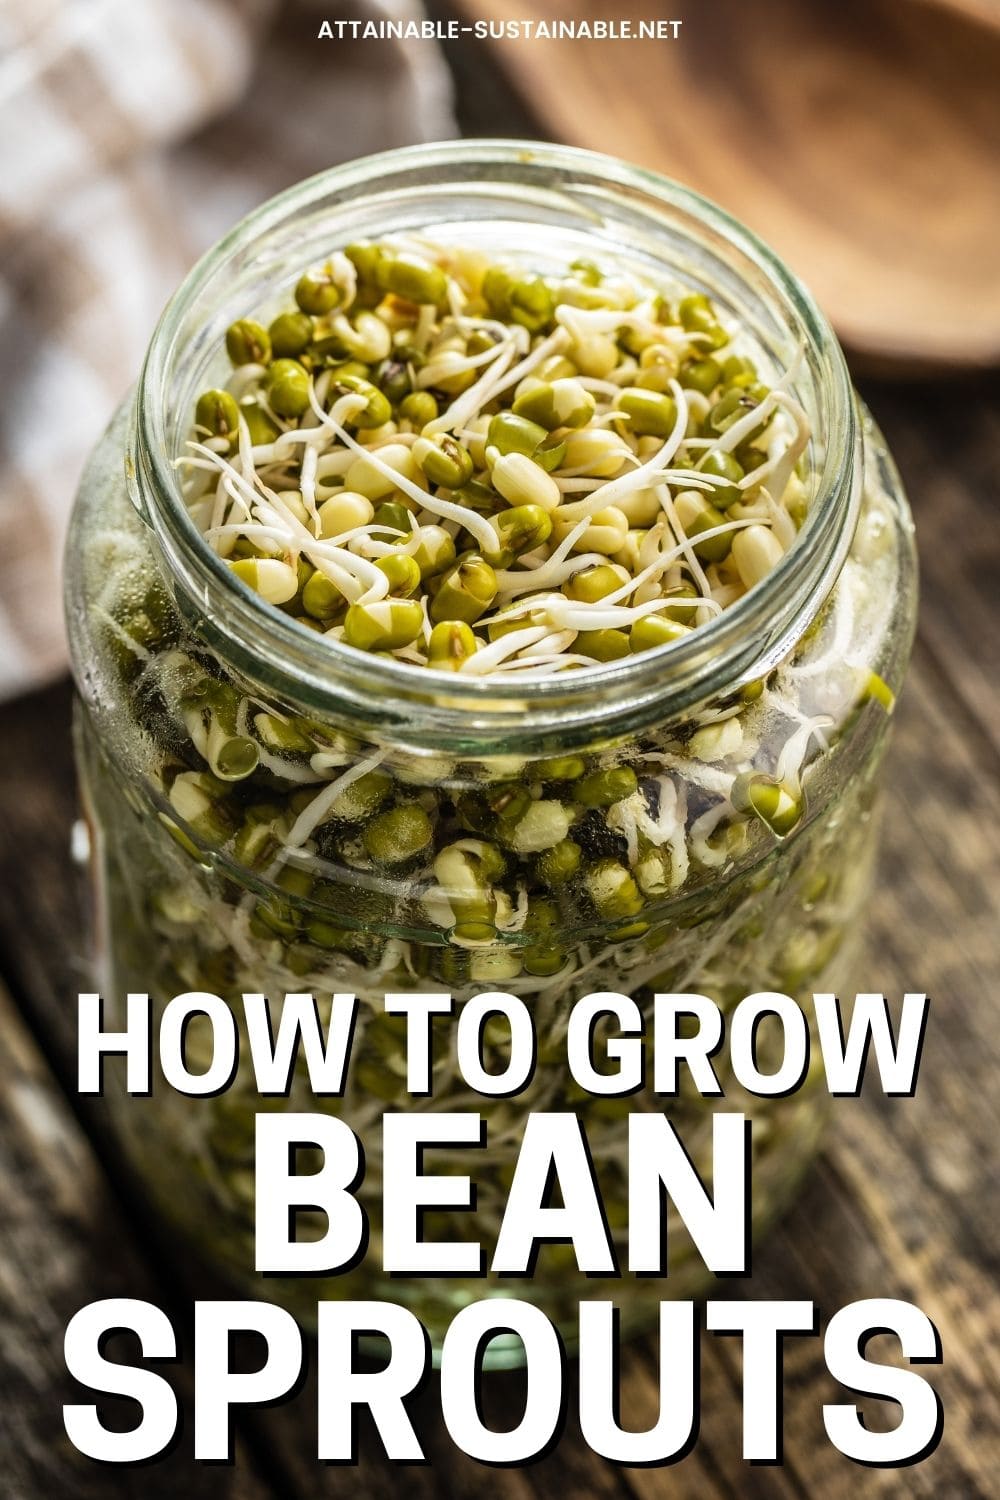 mung beans in a jar with sprouting rootlets.